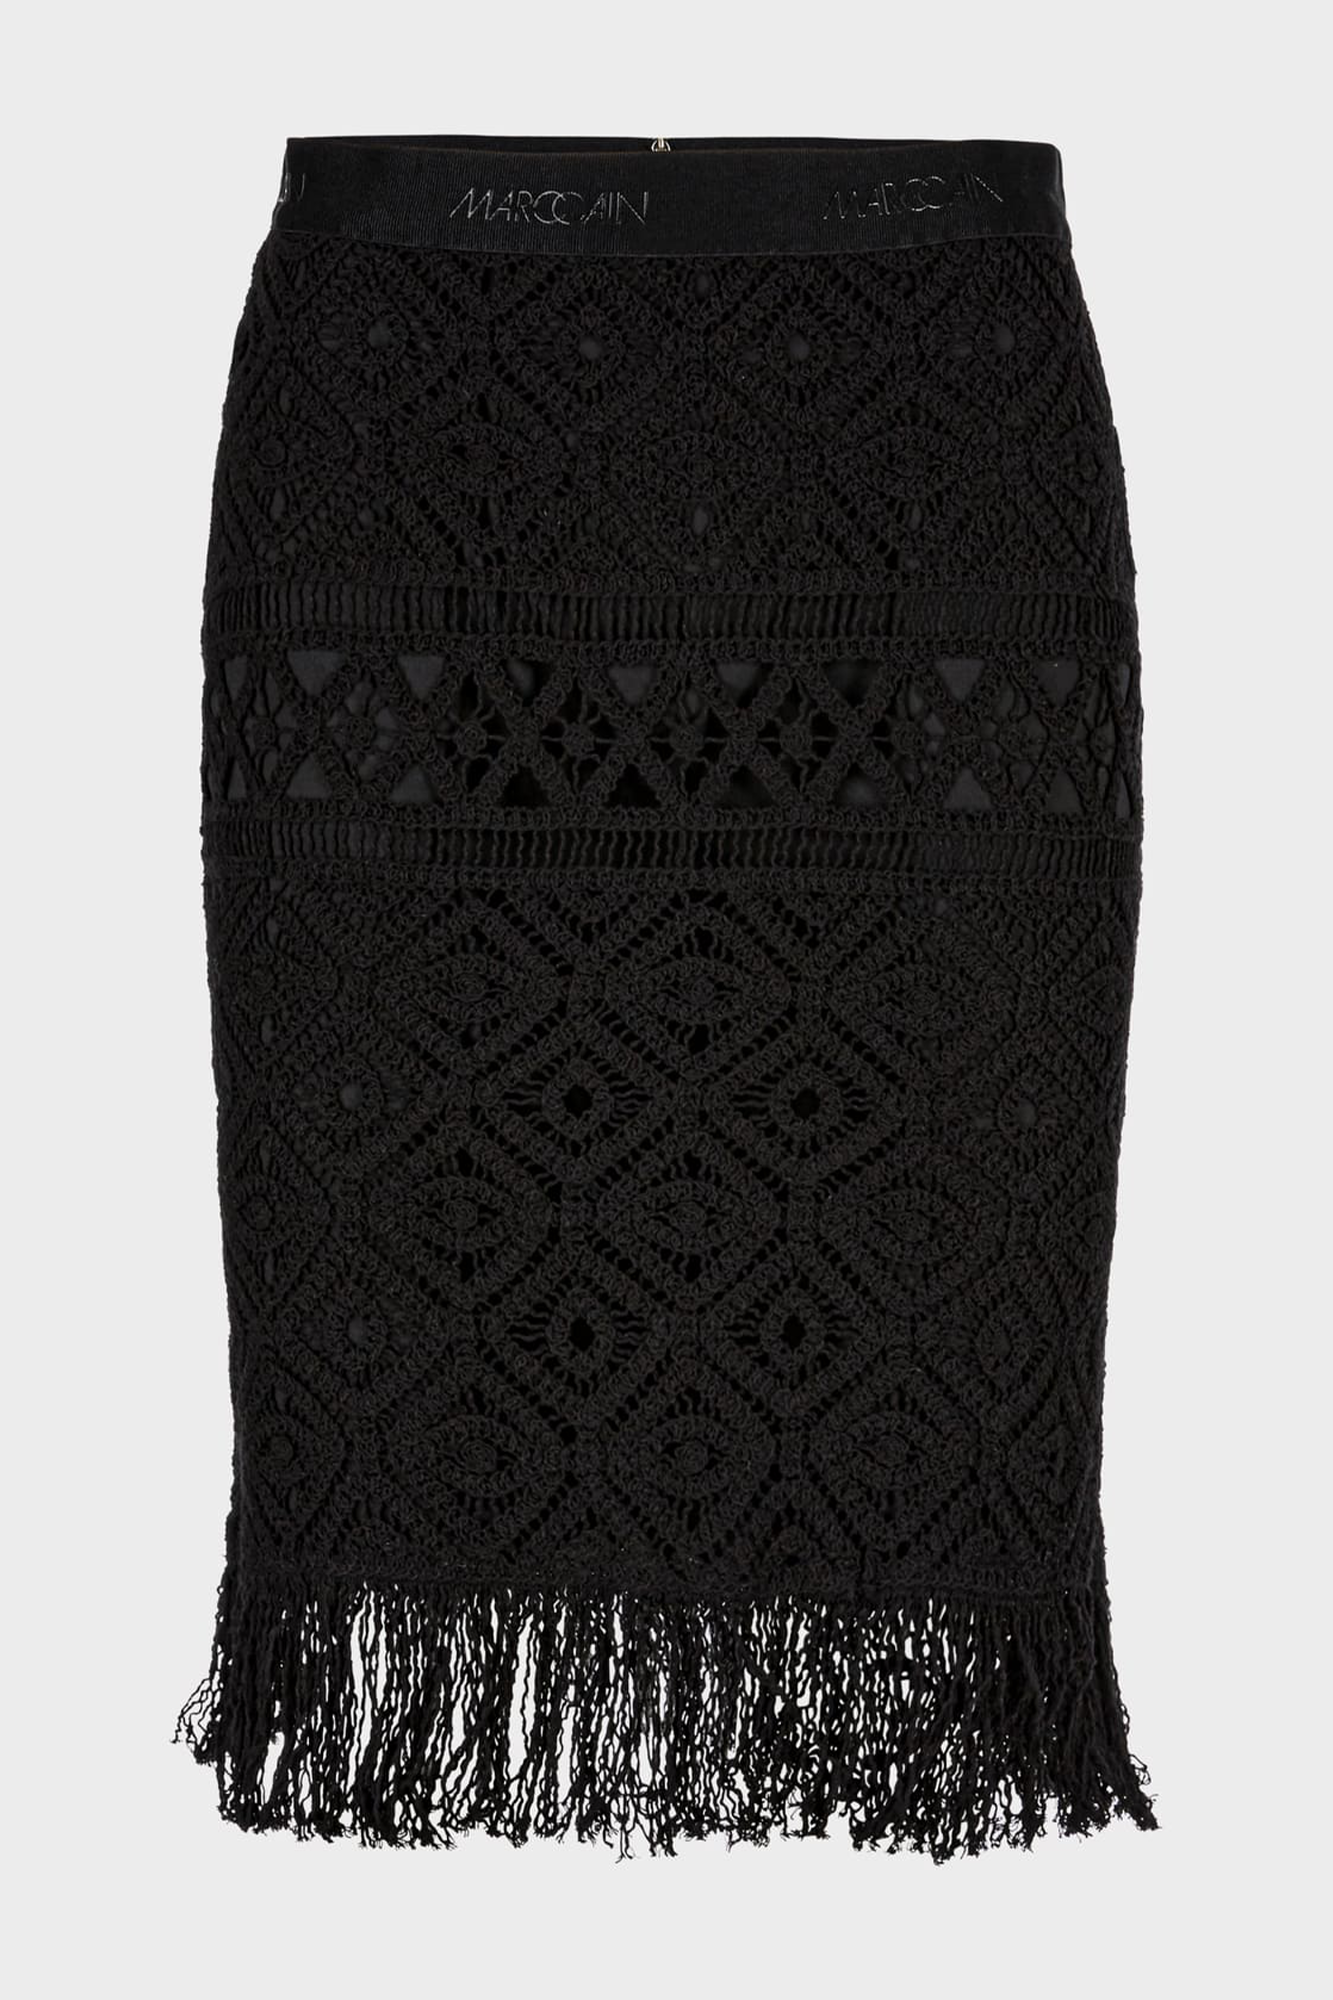 Ourika Gardens Short Skirt Mad From Crochet Lace Black